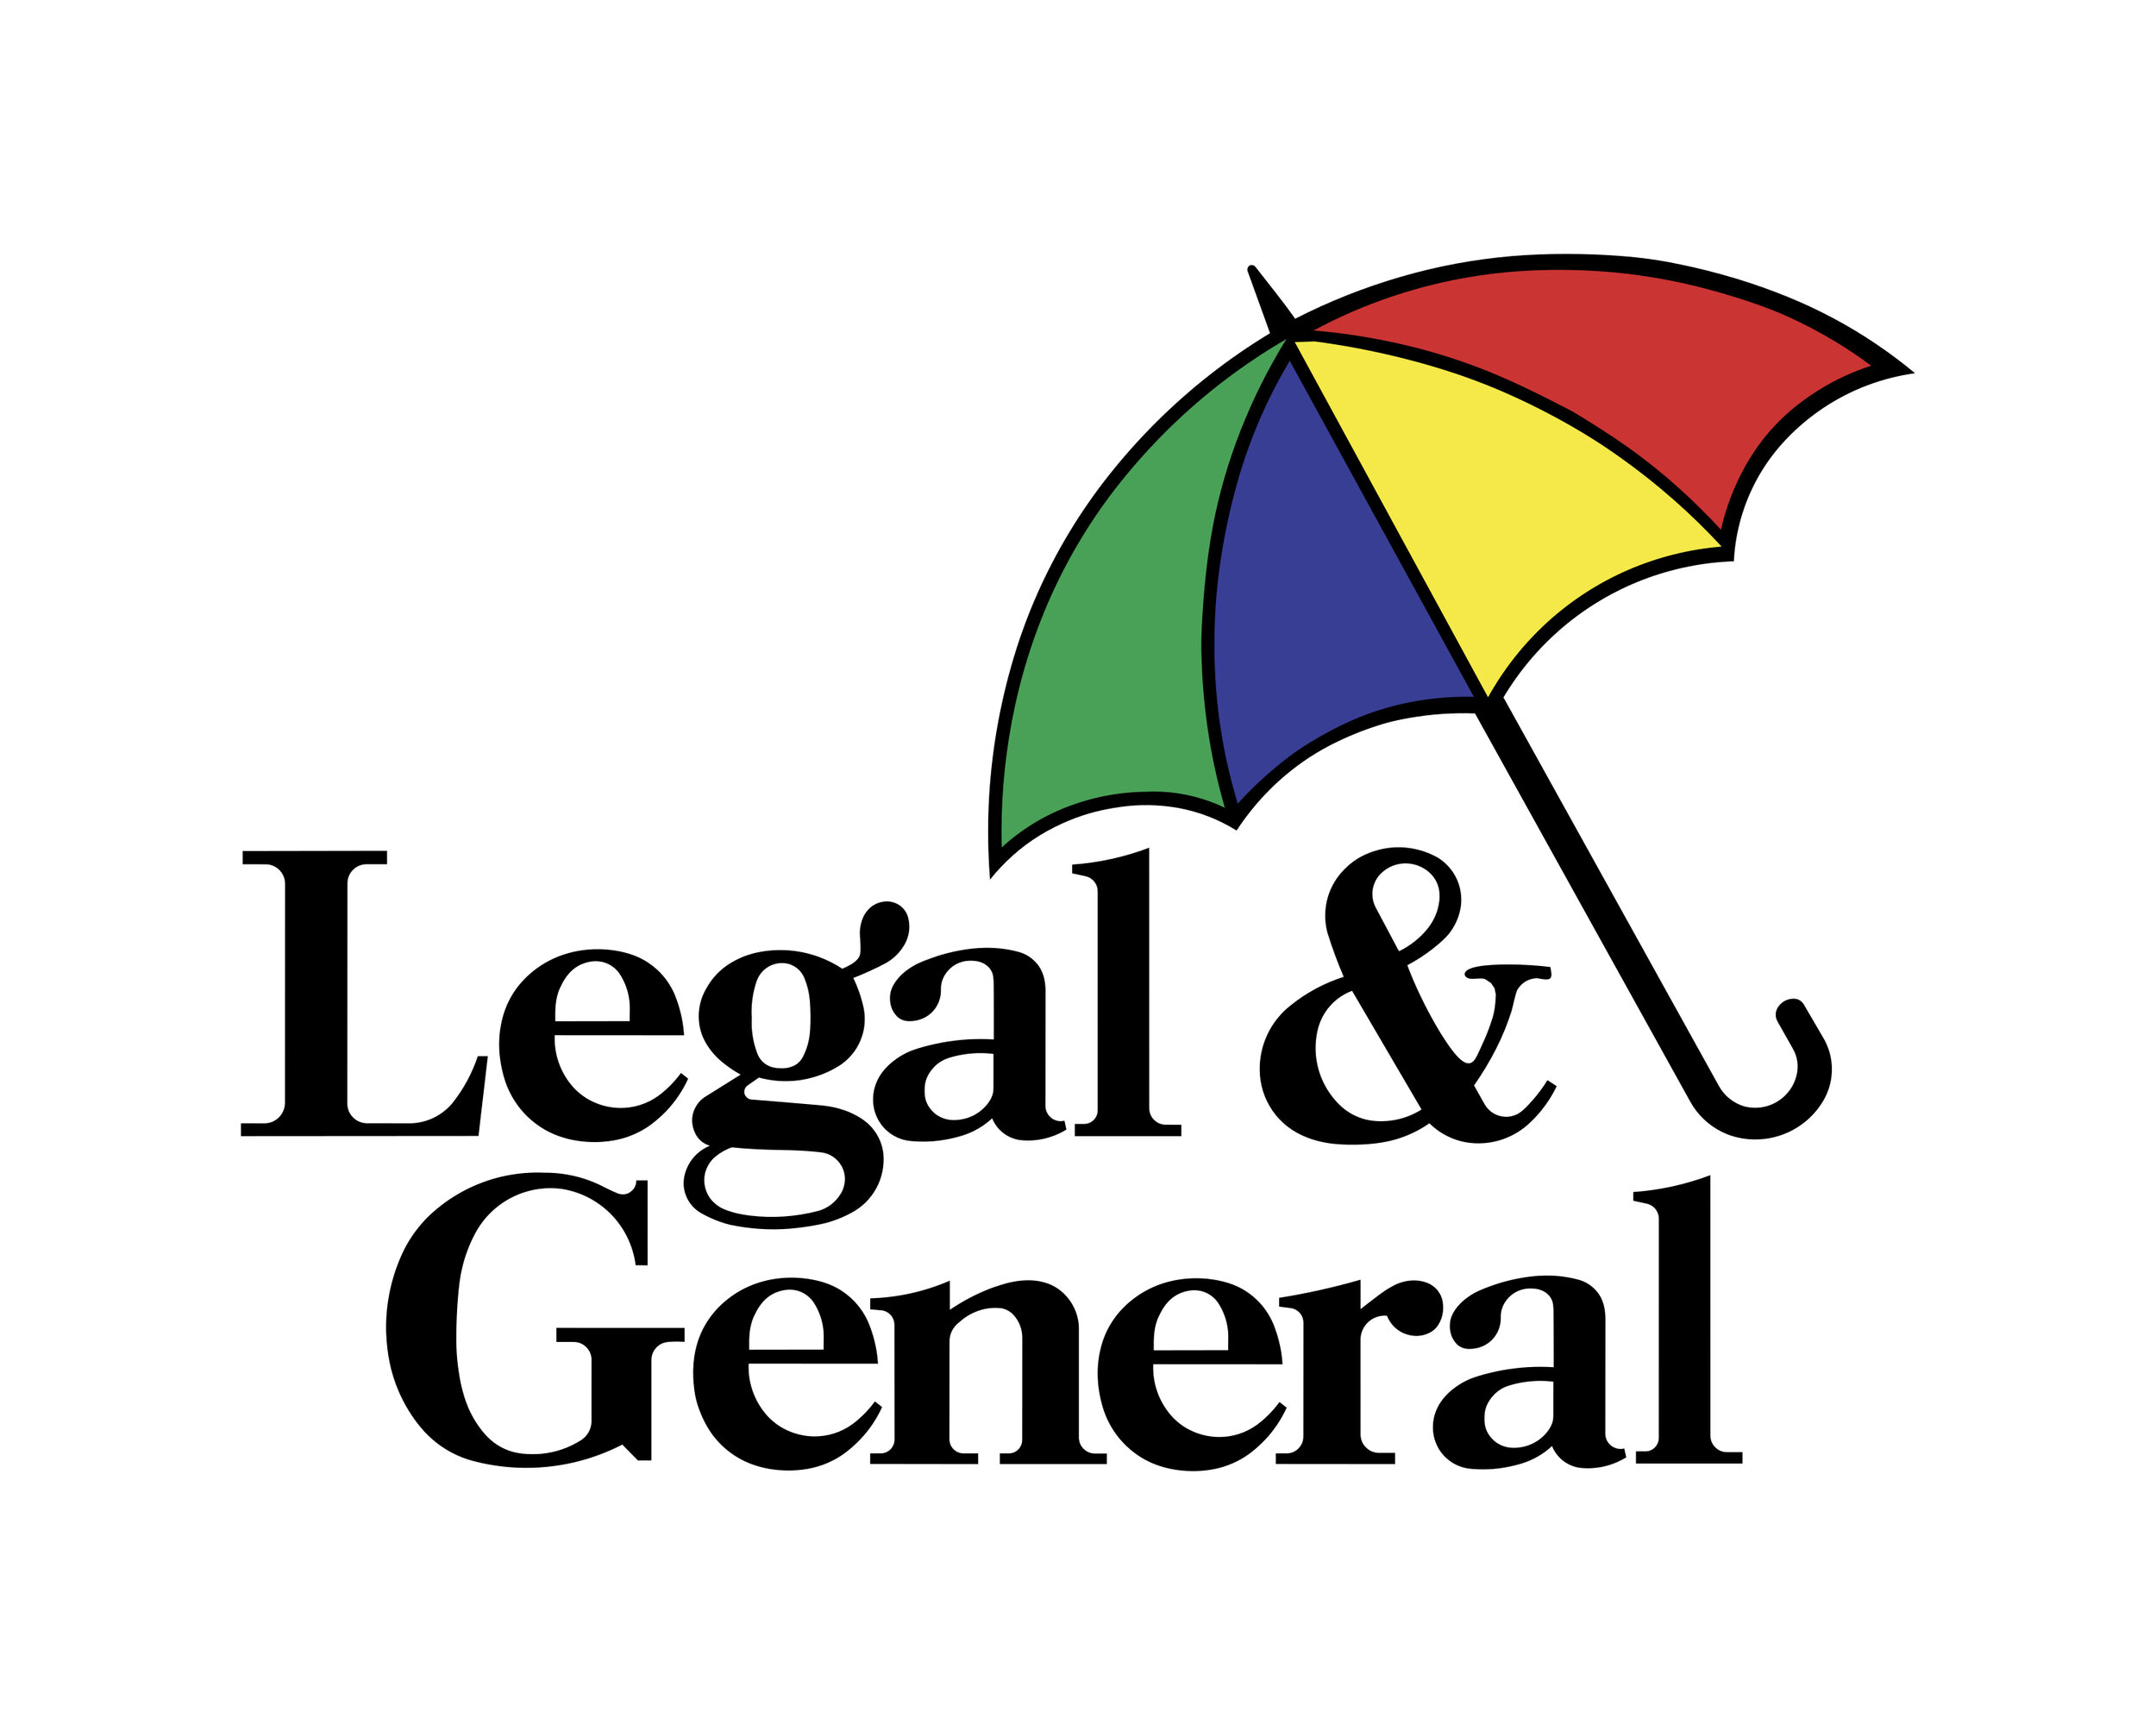 legal and general1.jpg